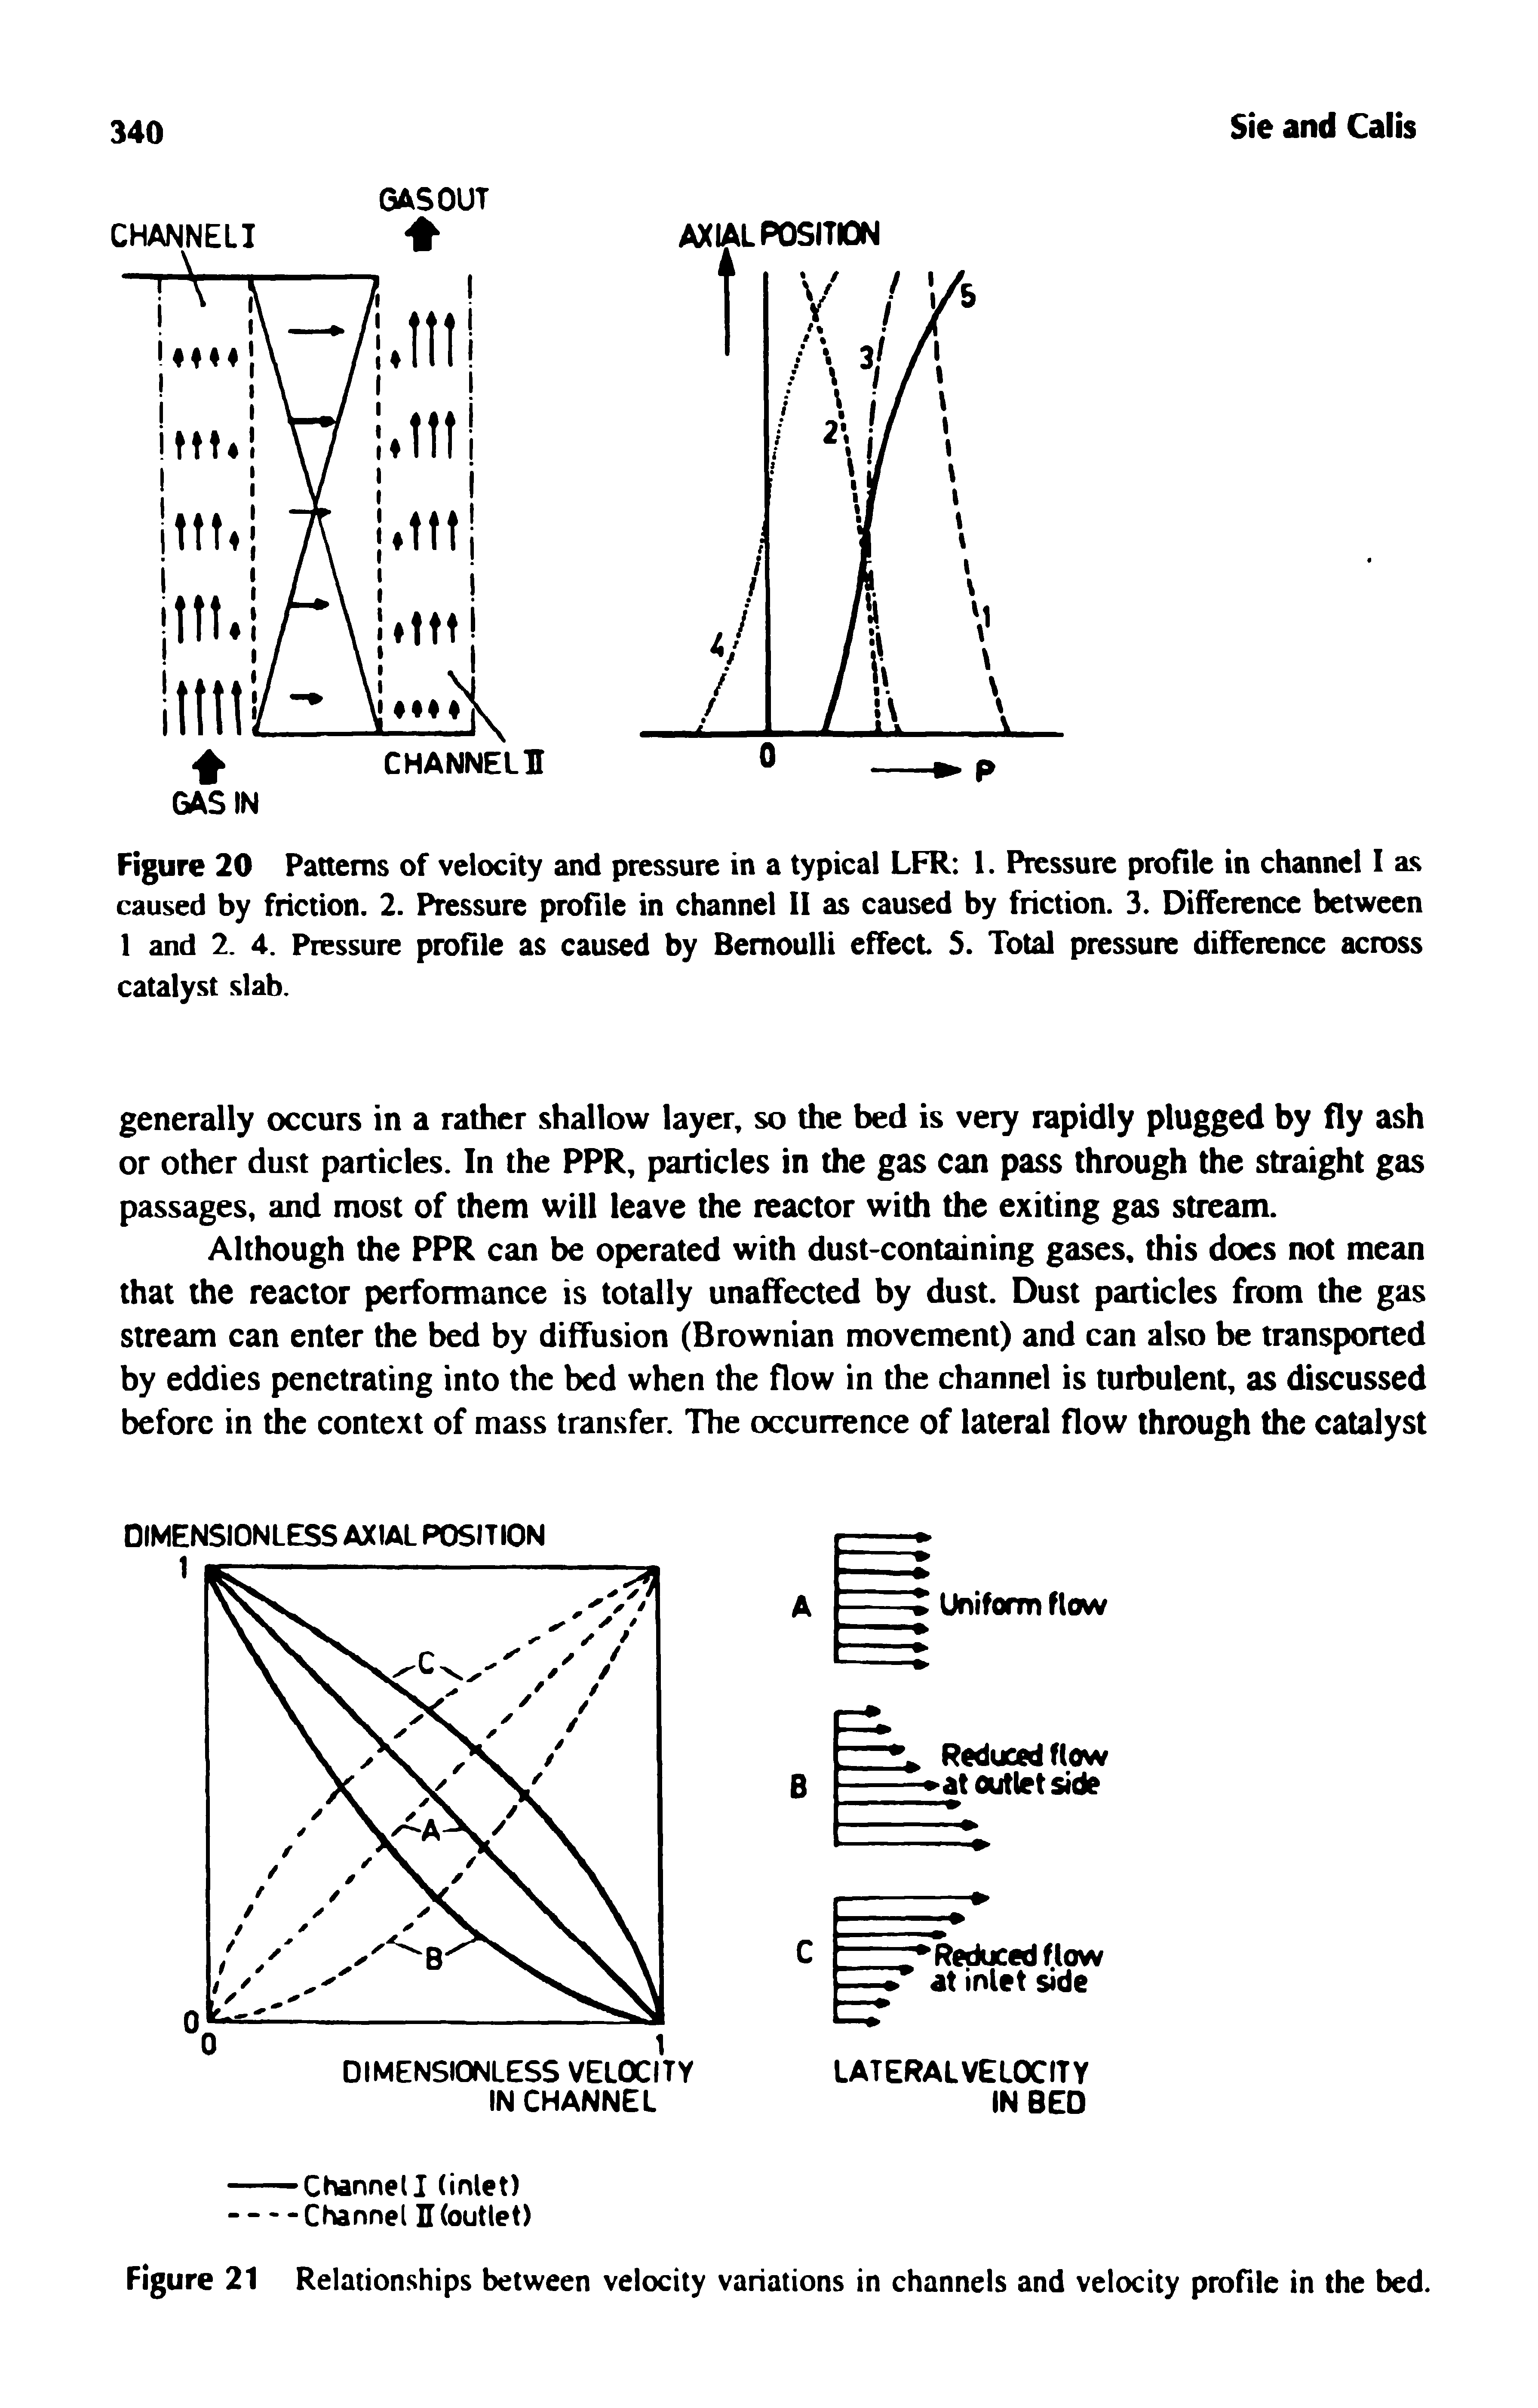 Figure 20 Patterns of velocity and pressure in a typical LFR 1. Pressure profile in channel I as caused by friction. 2. Pressure profile in channel 11 as caused by friction. 3. Difference between 1 and 2. 4. Pressure profile as caused by Bernoulli effect 5. Total pressure difference across catalyst slab.